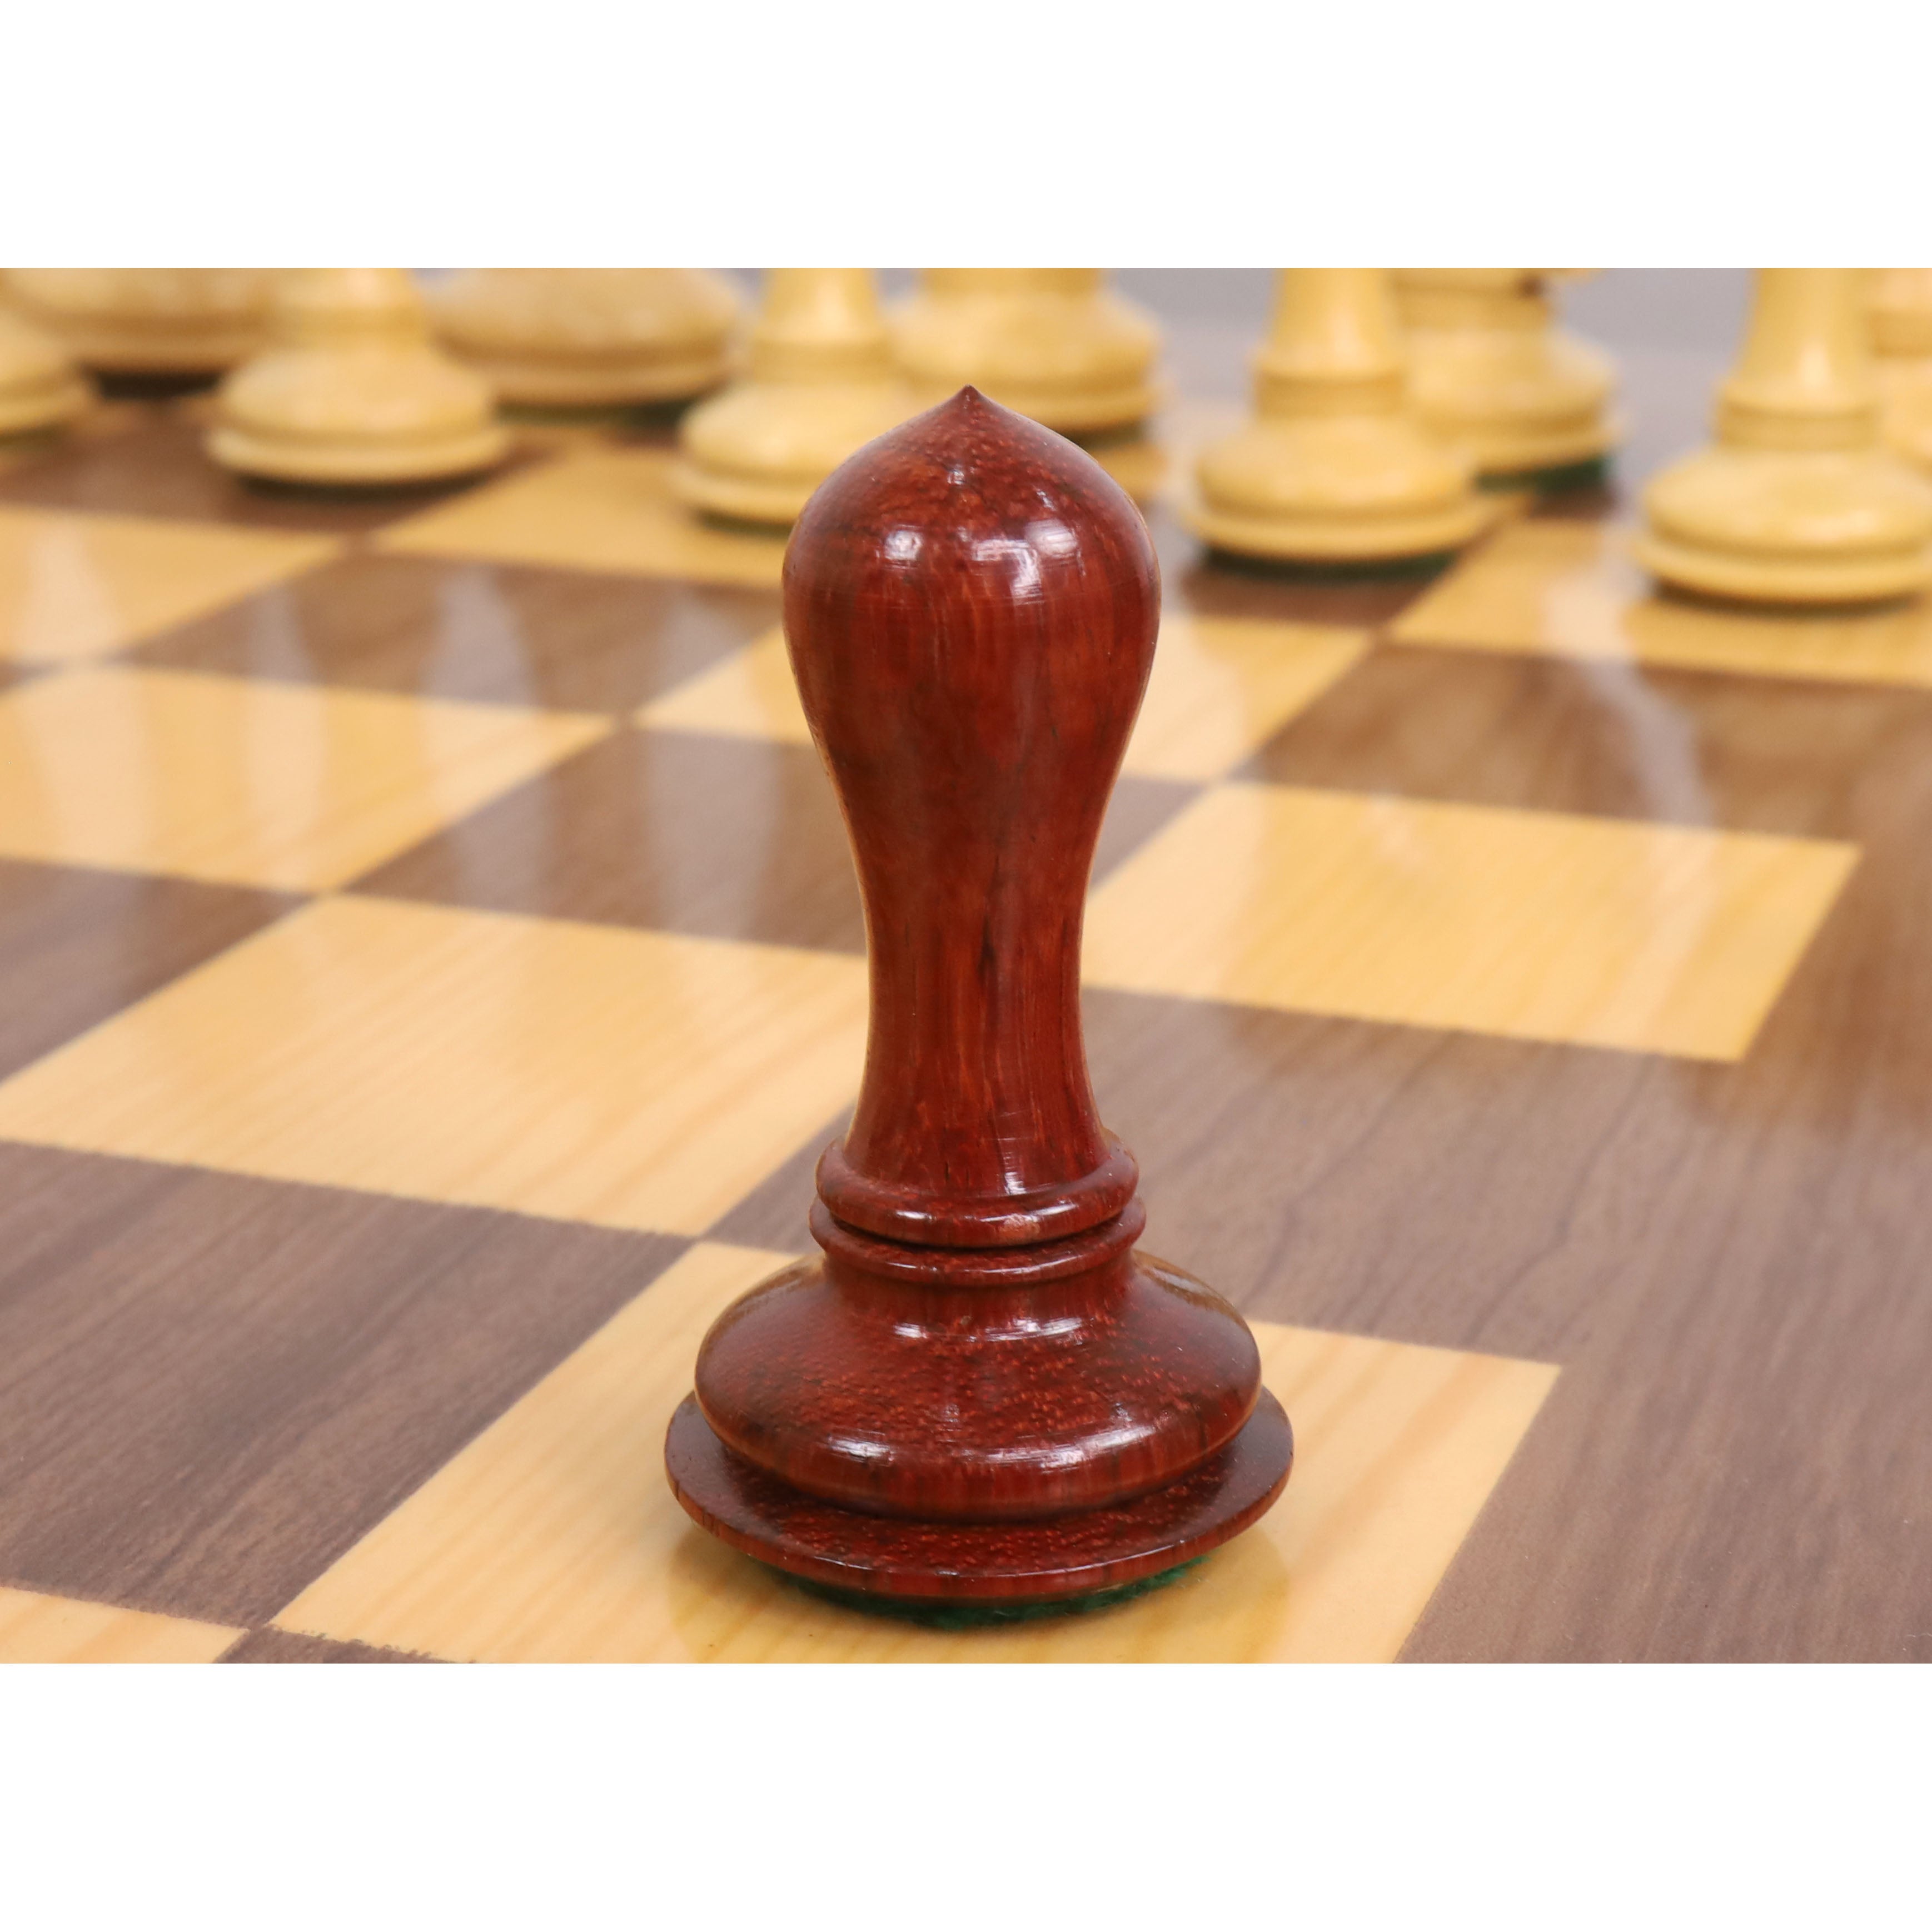 4.6" Avant Garde Luxury Staunton Chess Pieces Only Set - Triple Weighted - Bud Rosewood & Boxwood